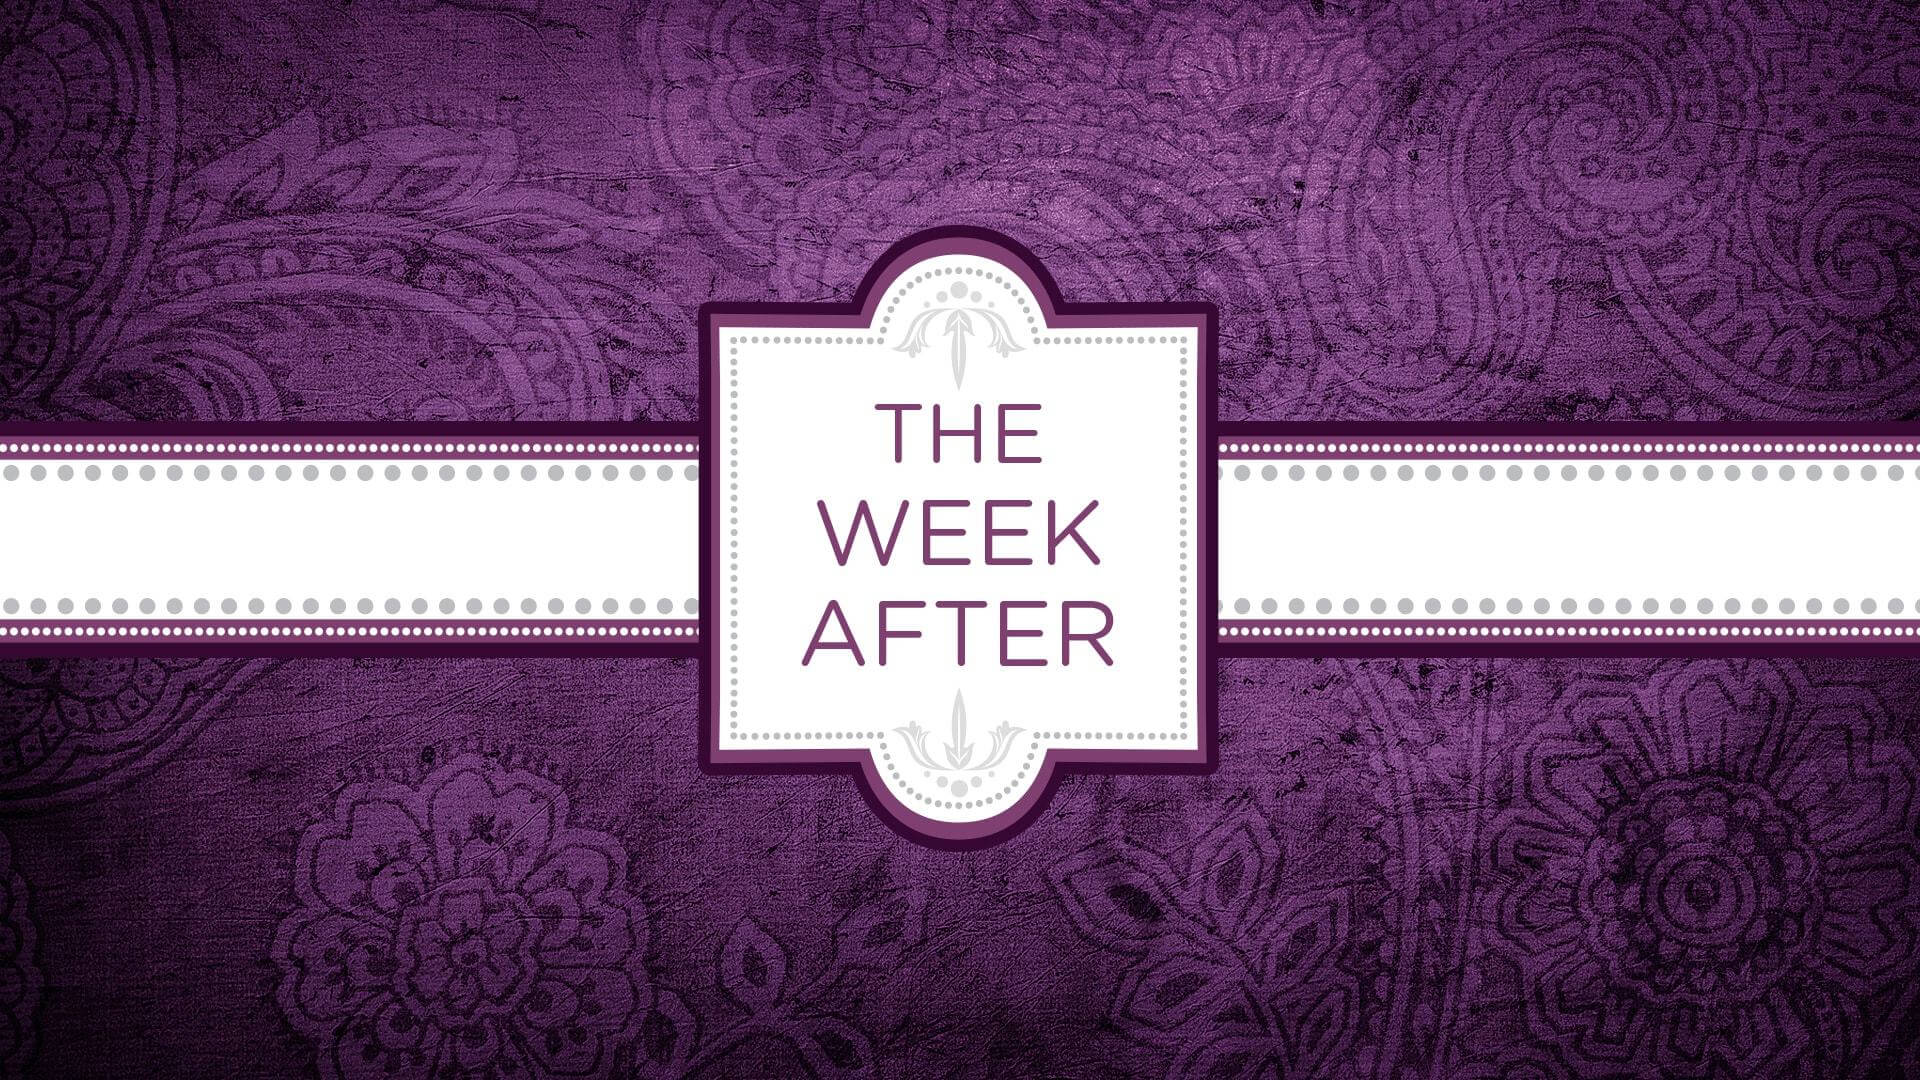 the-week-after-1920x1080-1.jpg